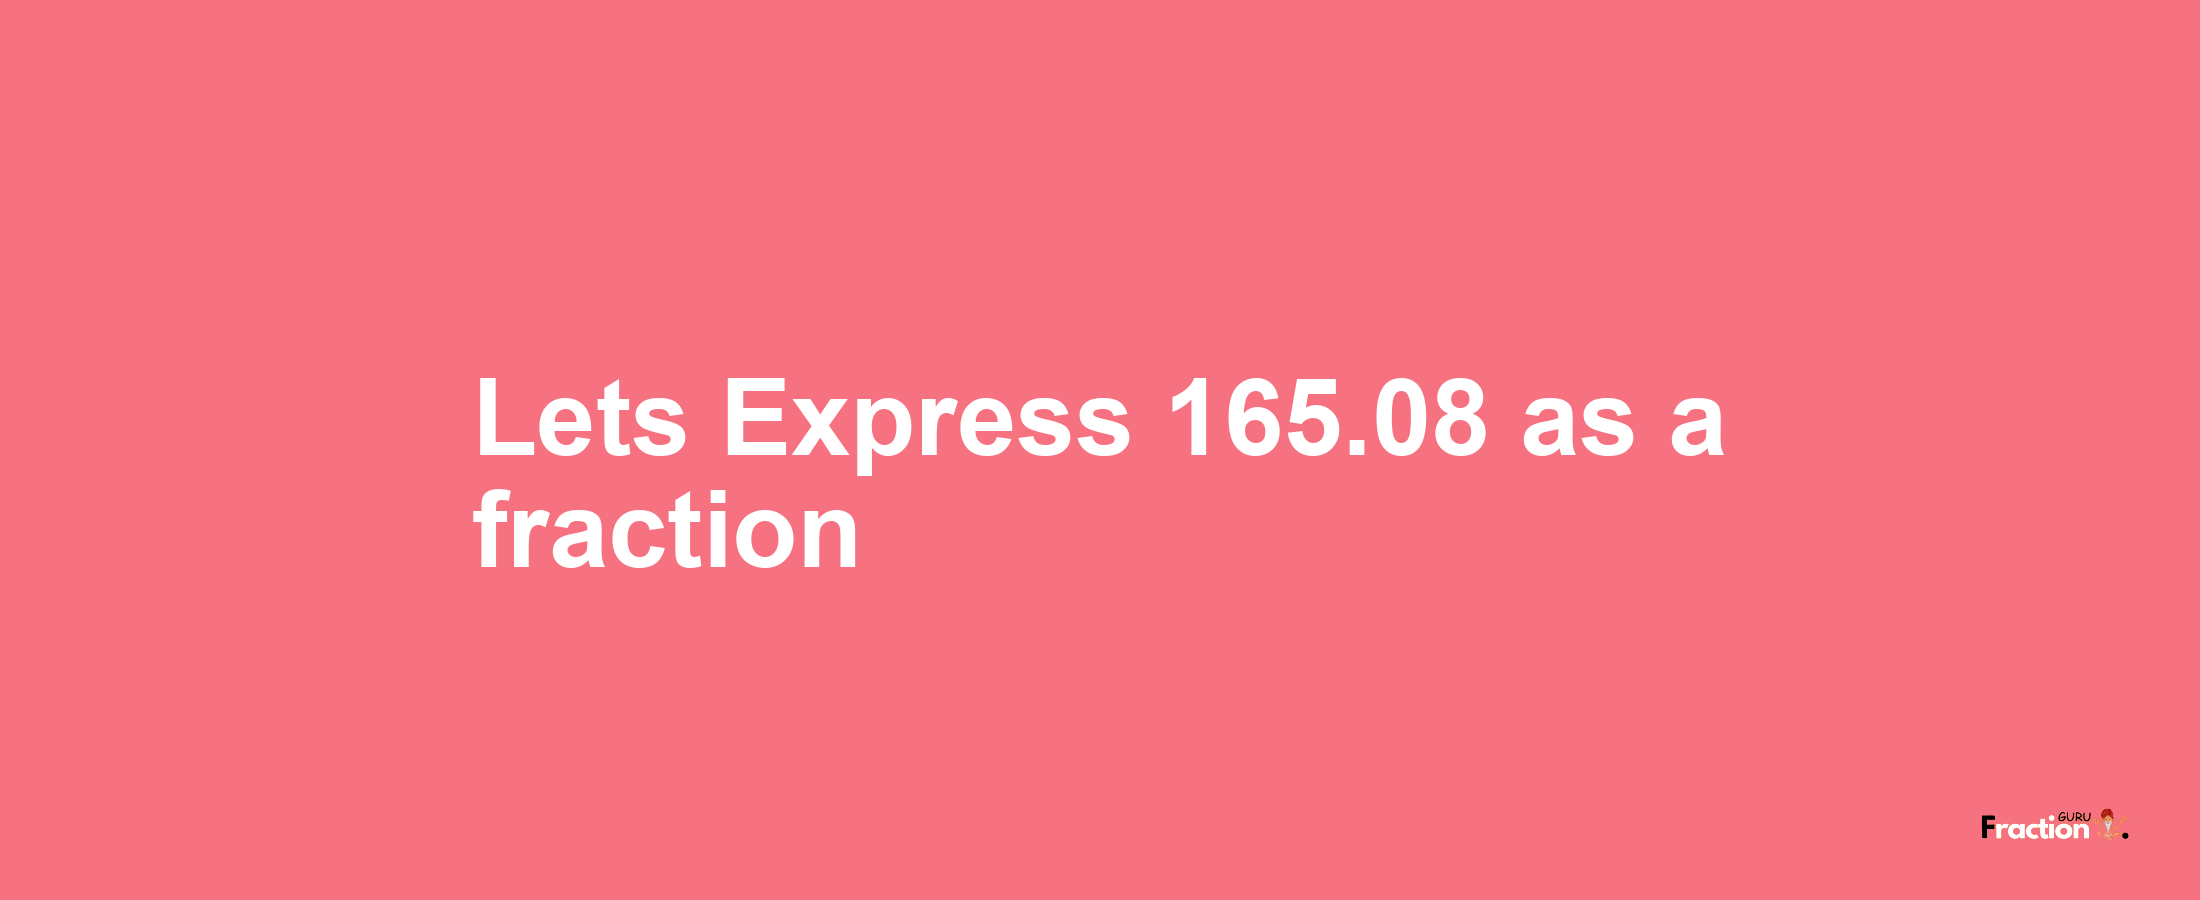 Lets Express 165.08 as afraction